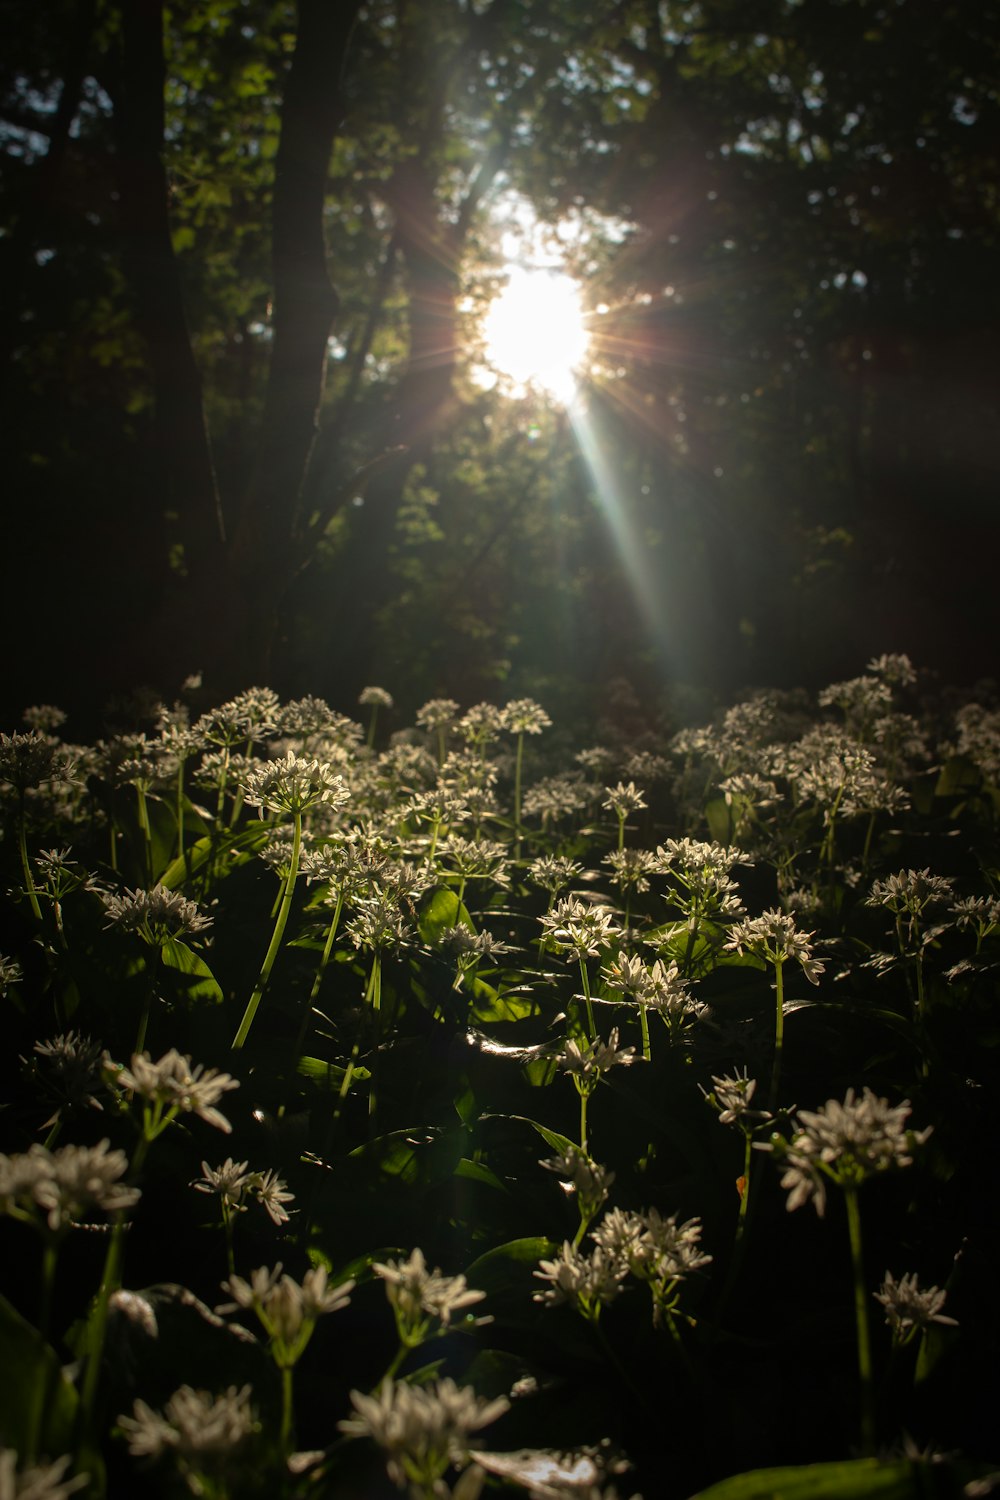 the sun shines through the trees in a field of daisies